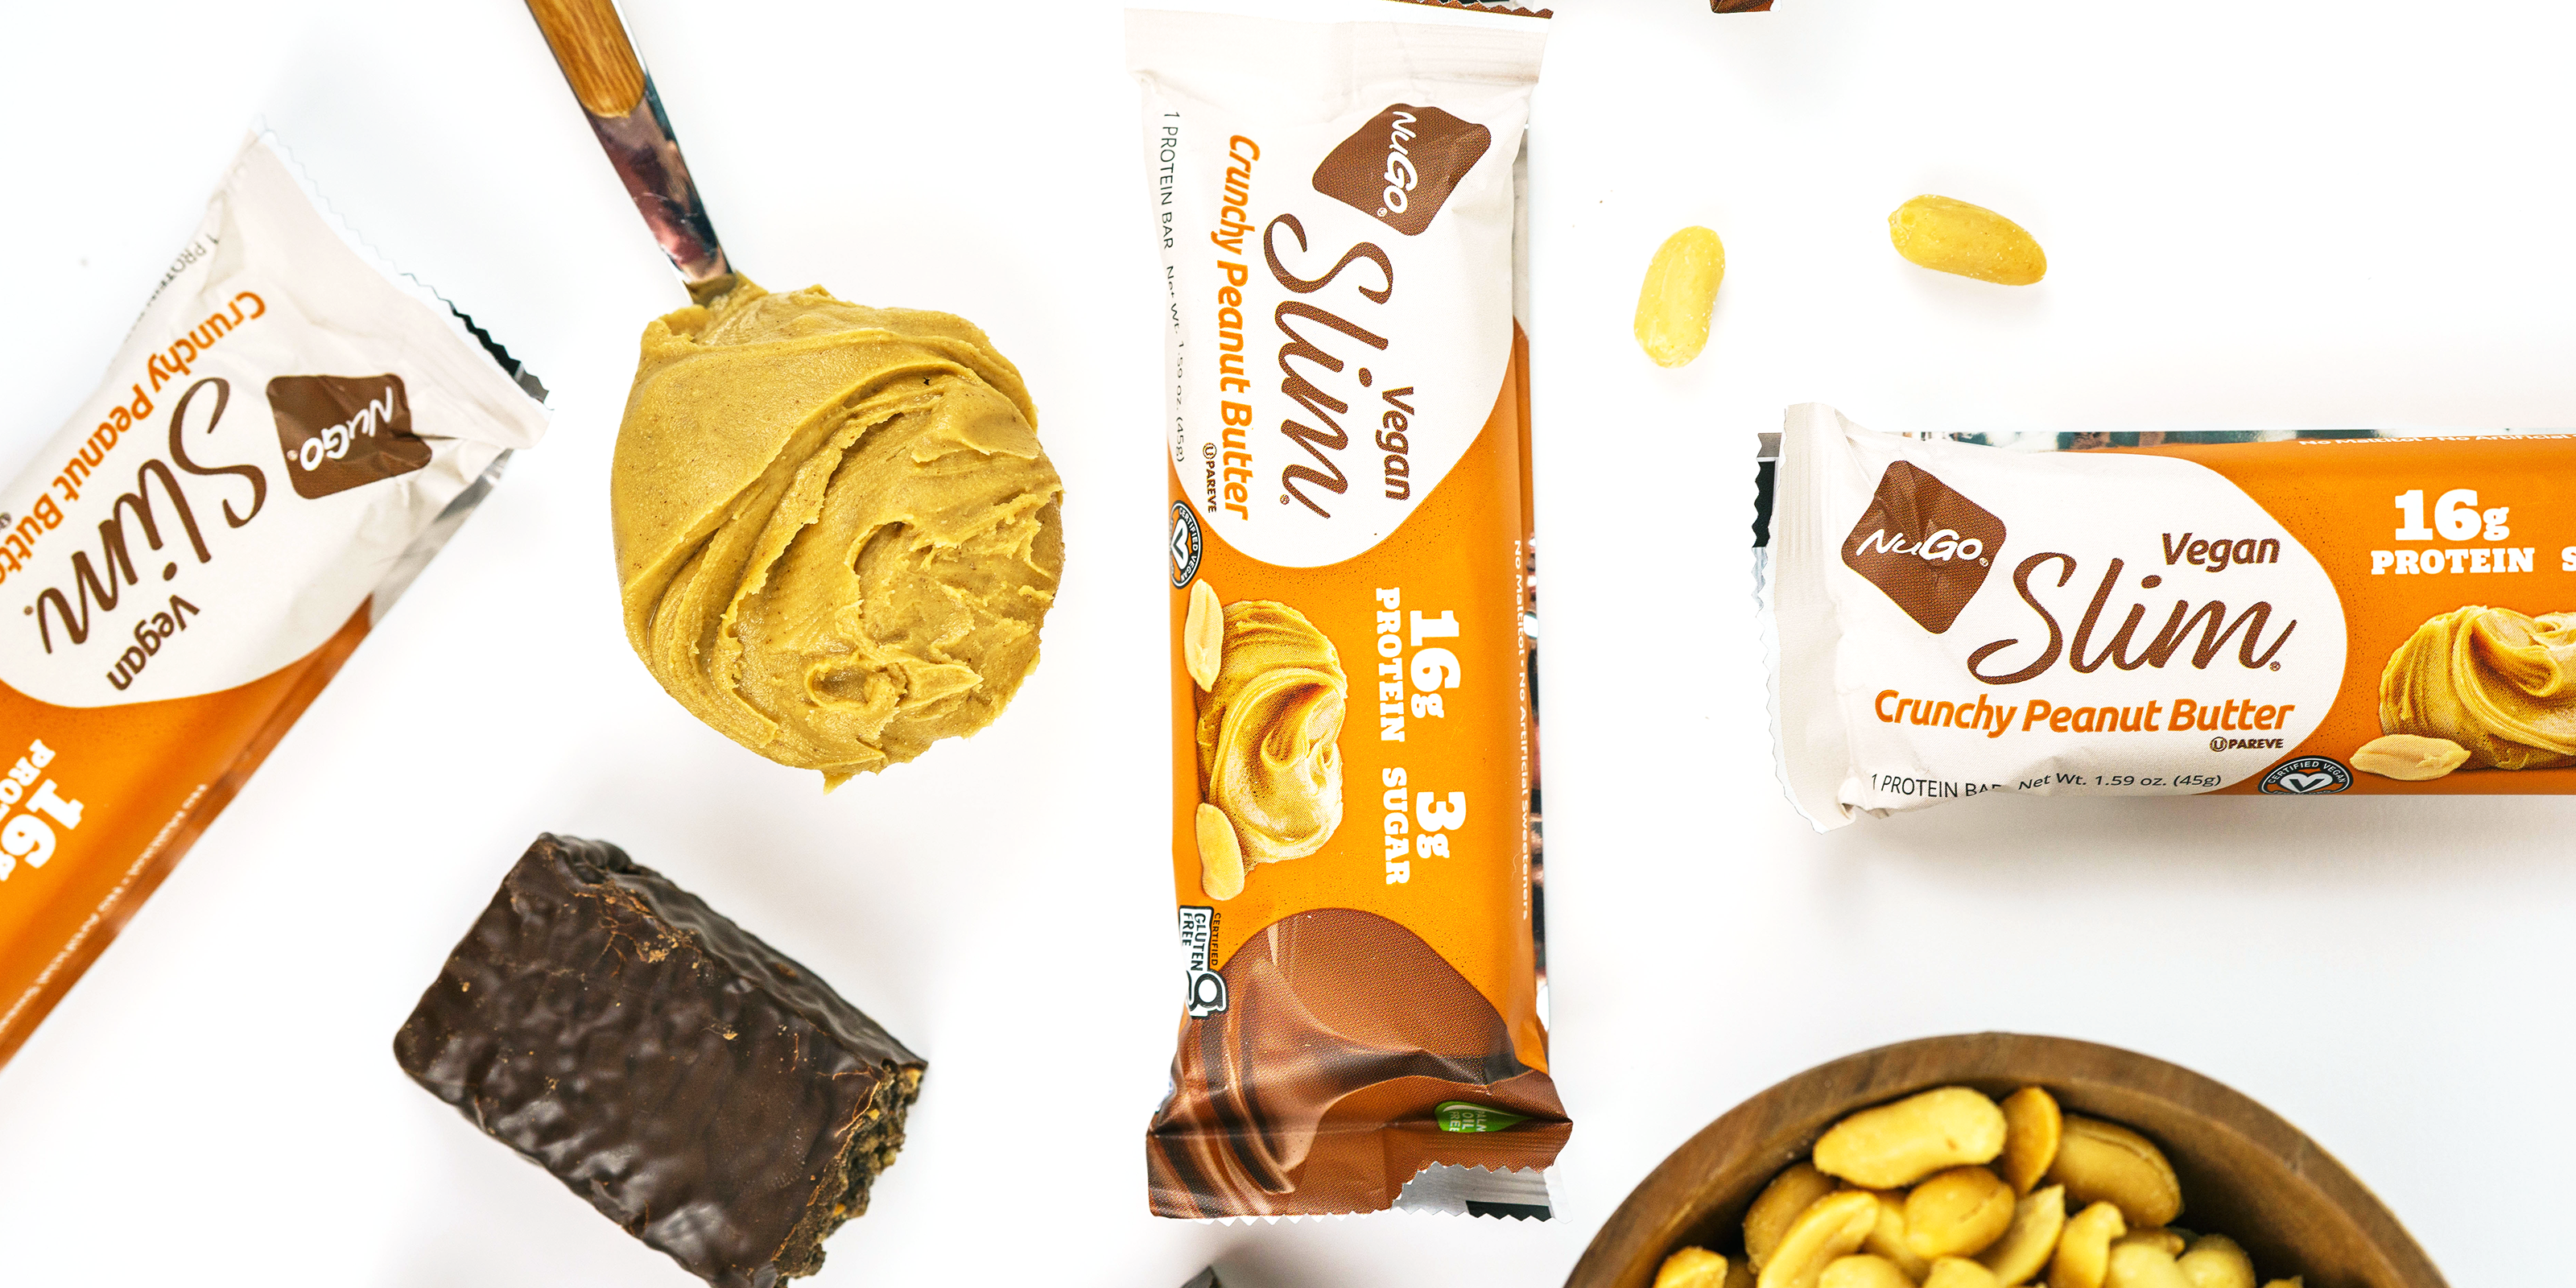 NuGo Slim Crunchy Peanut Butter wrapped bars with a bowl of peanuts and spoon of peanut butter